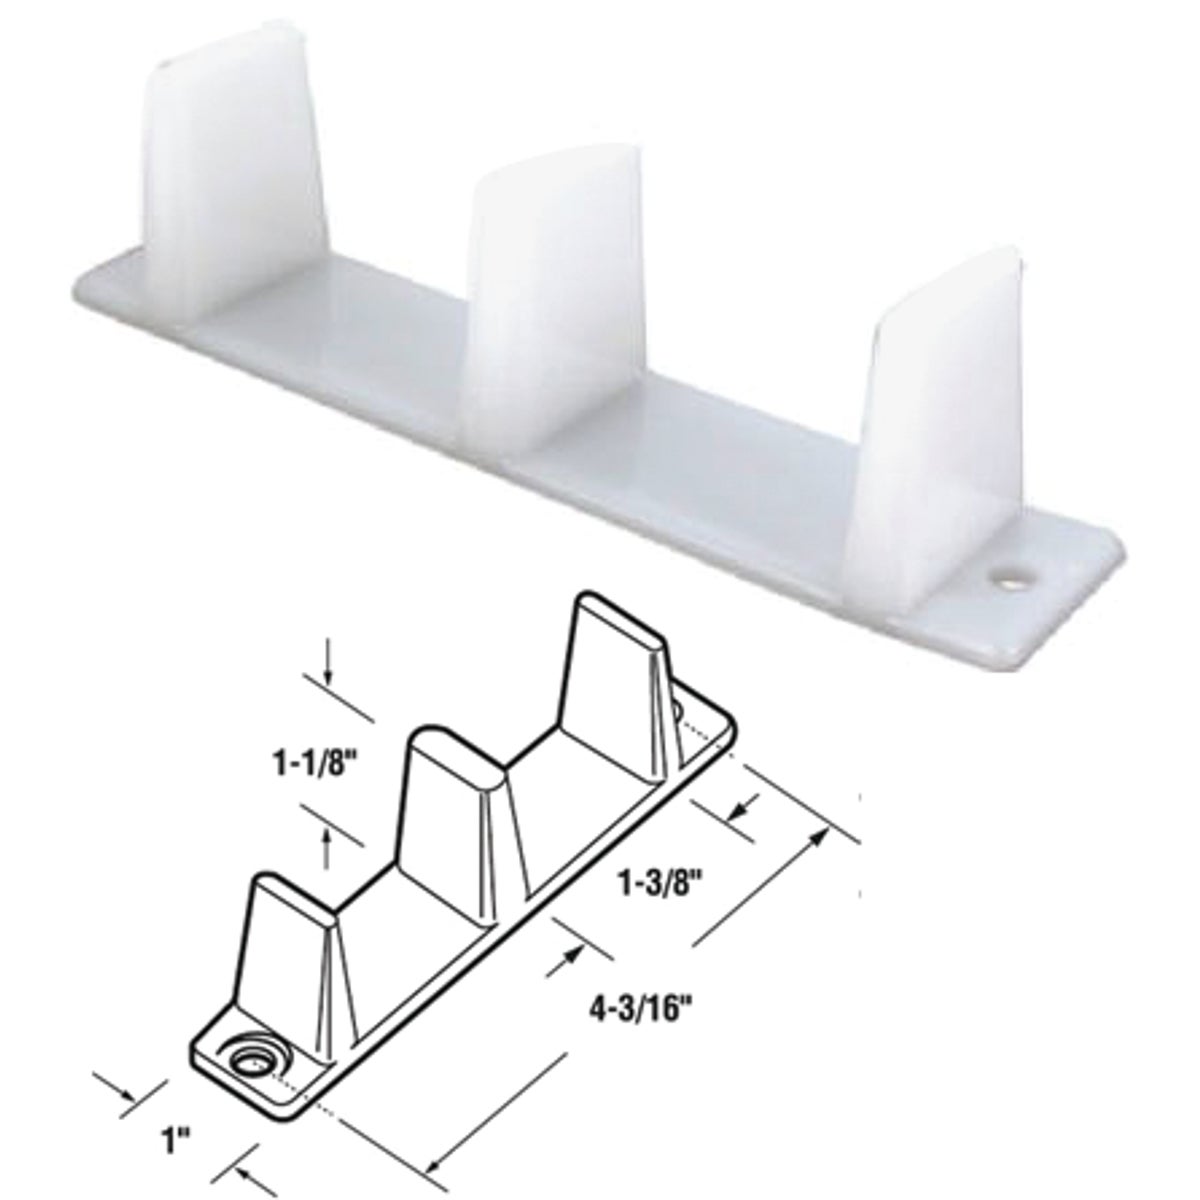 Item 204358, Bottom mount floor guide for use on by-pass wardrobe door.